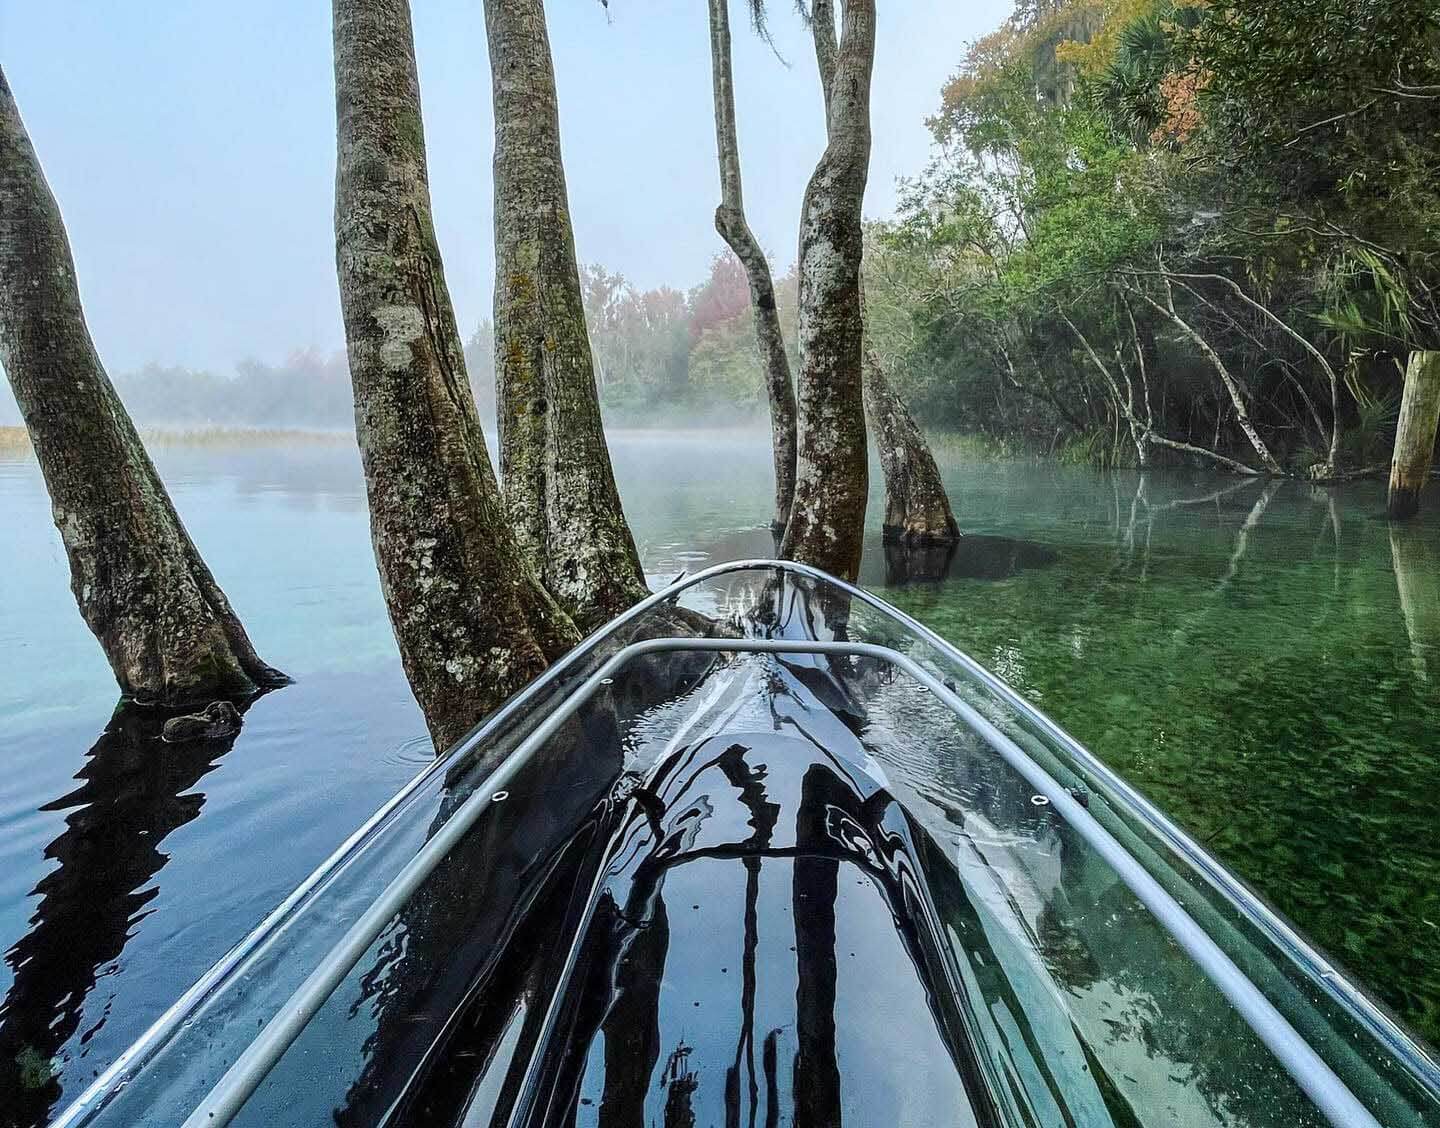 Clear kayak on the water among the trees. 